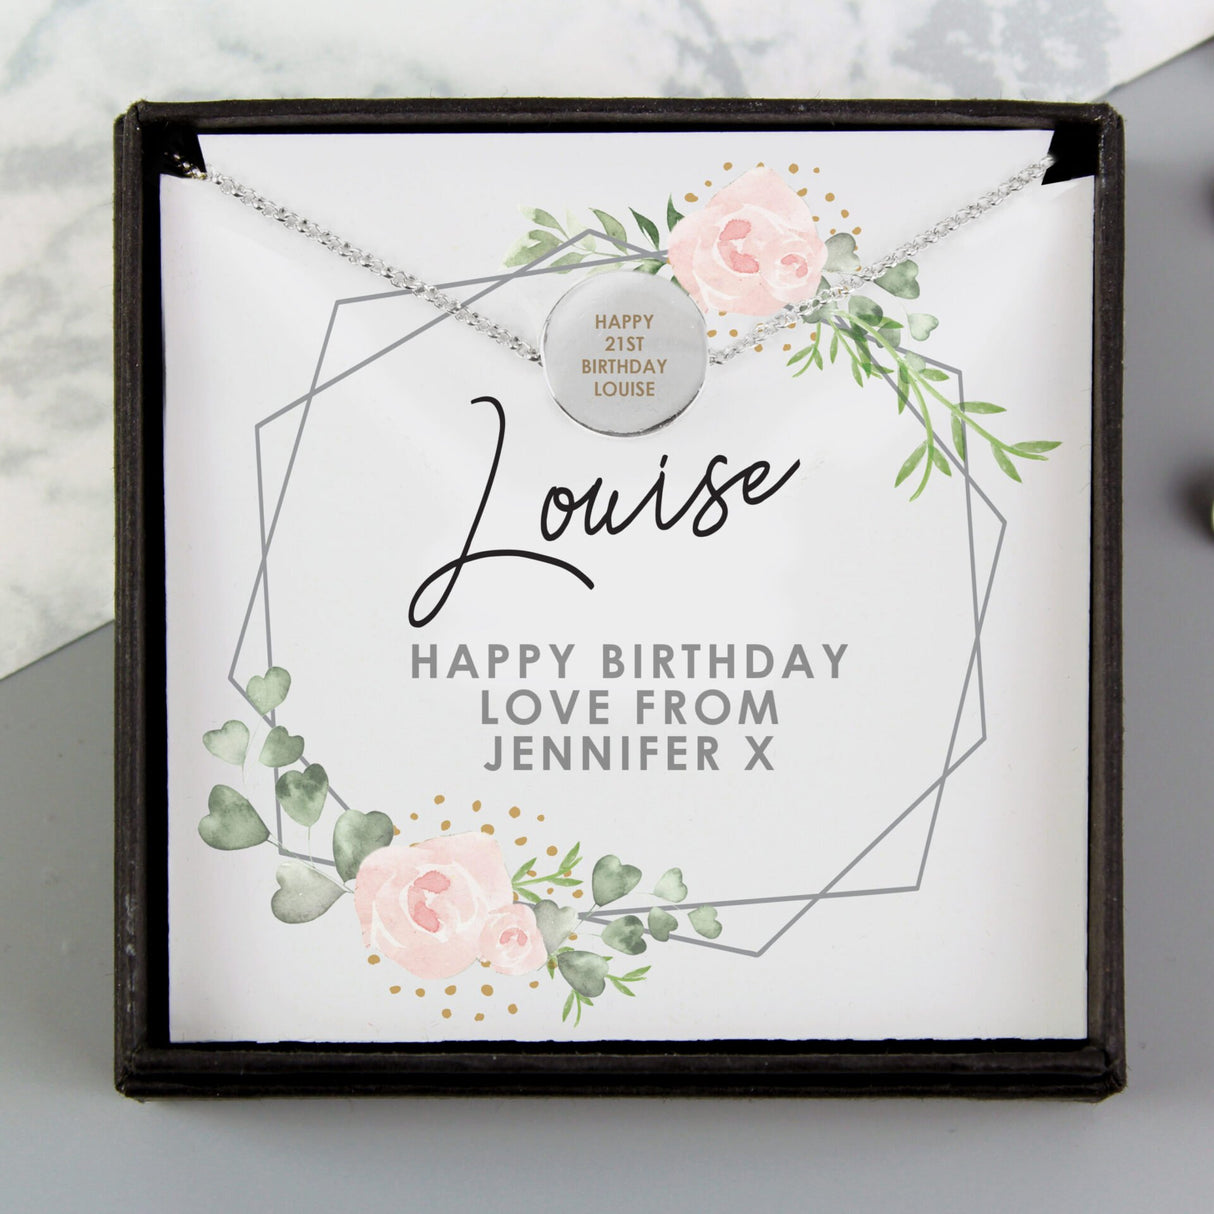 Abstract Rose Silver Tone Necklace and Box - Gift Moments